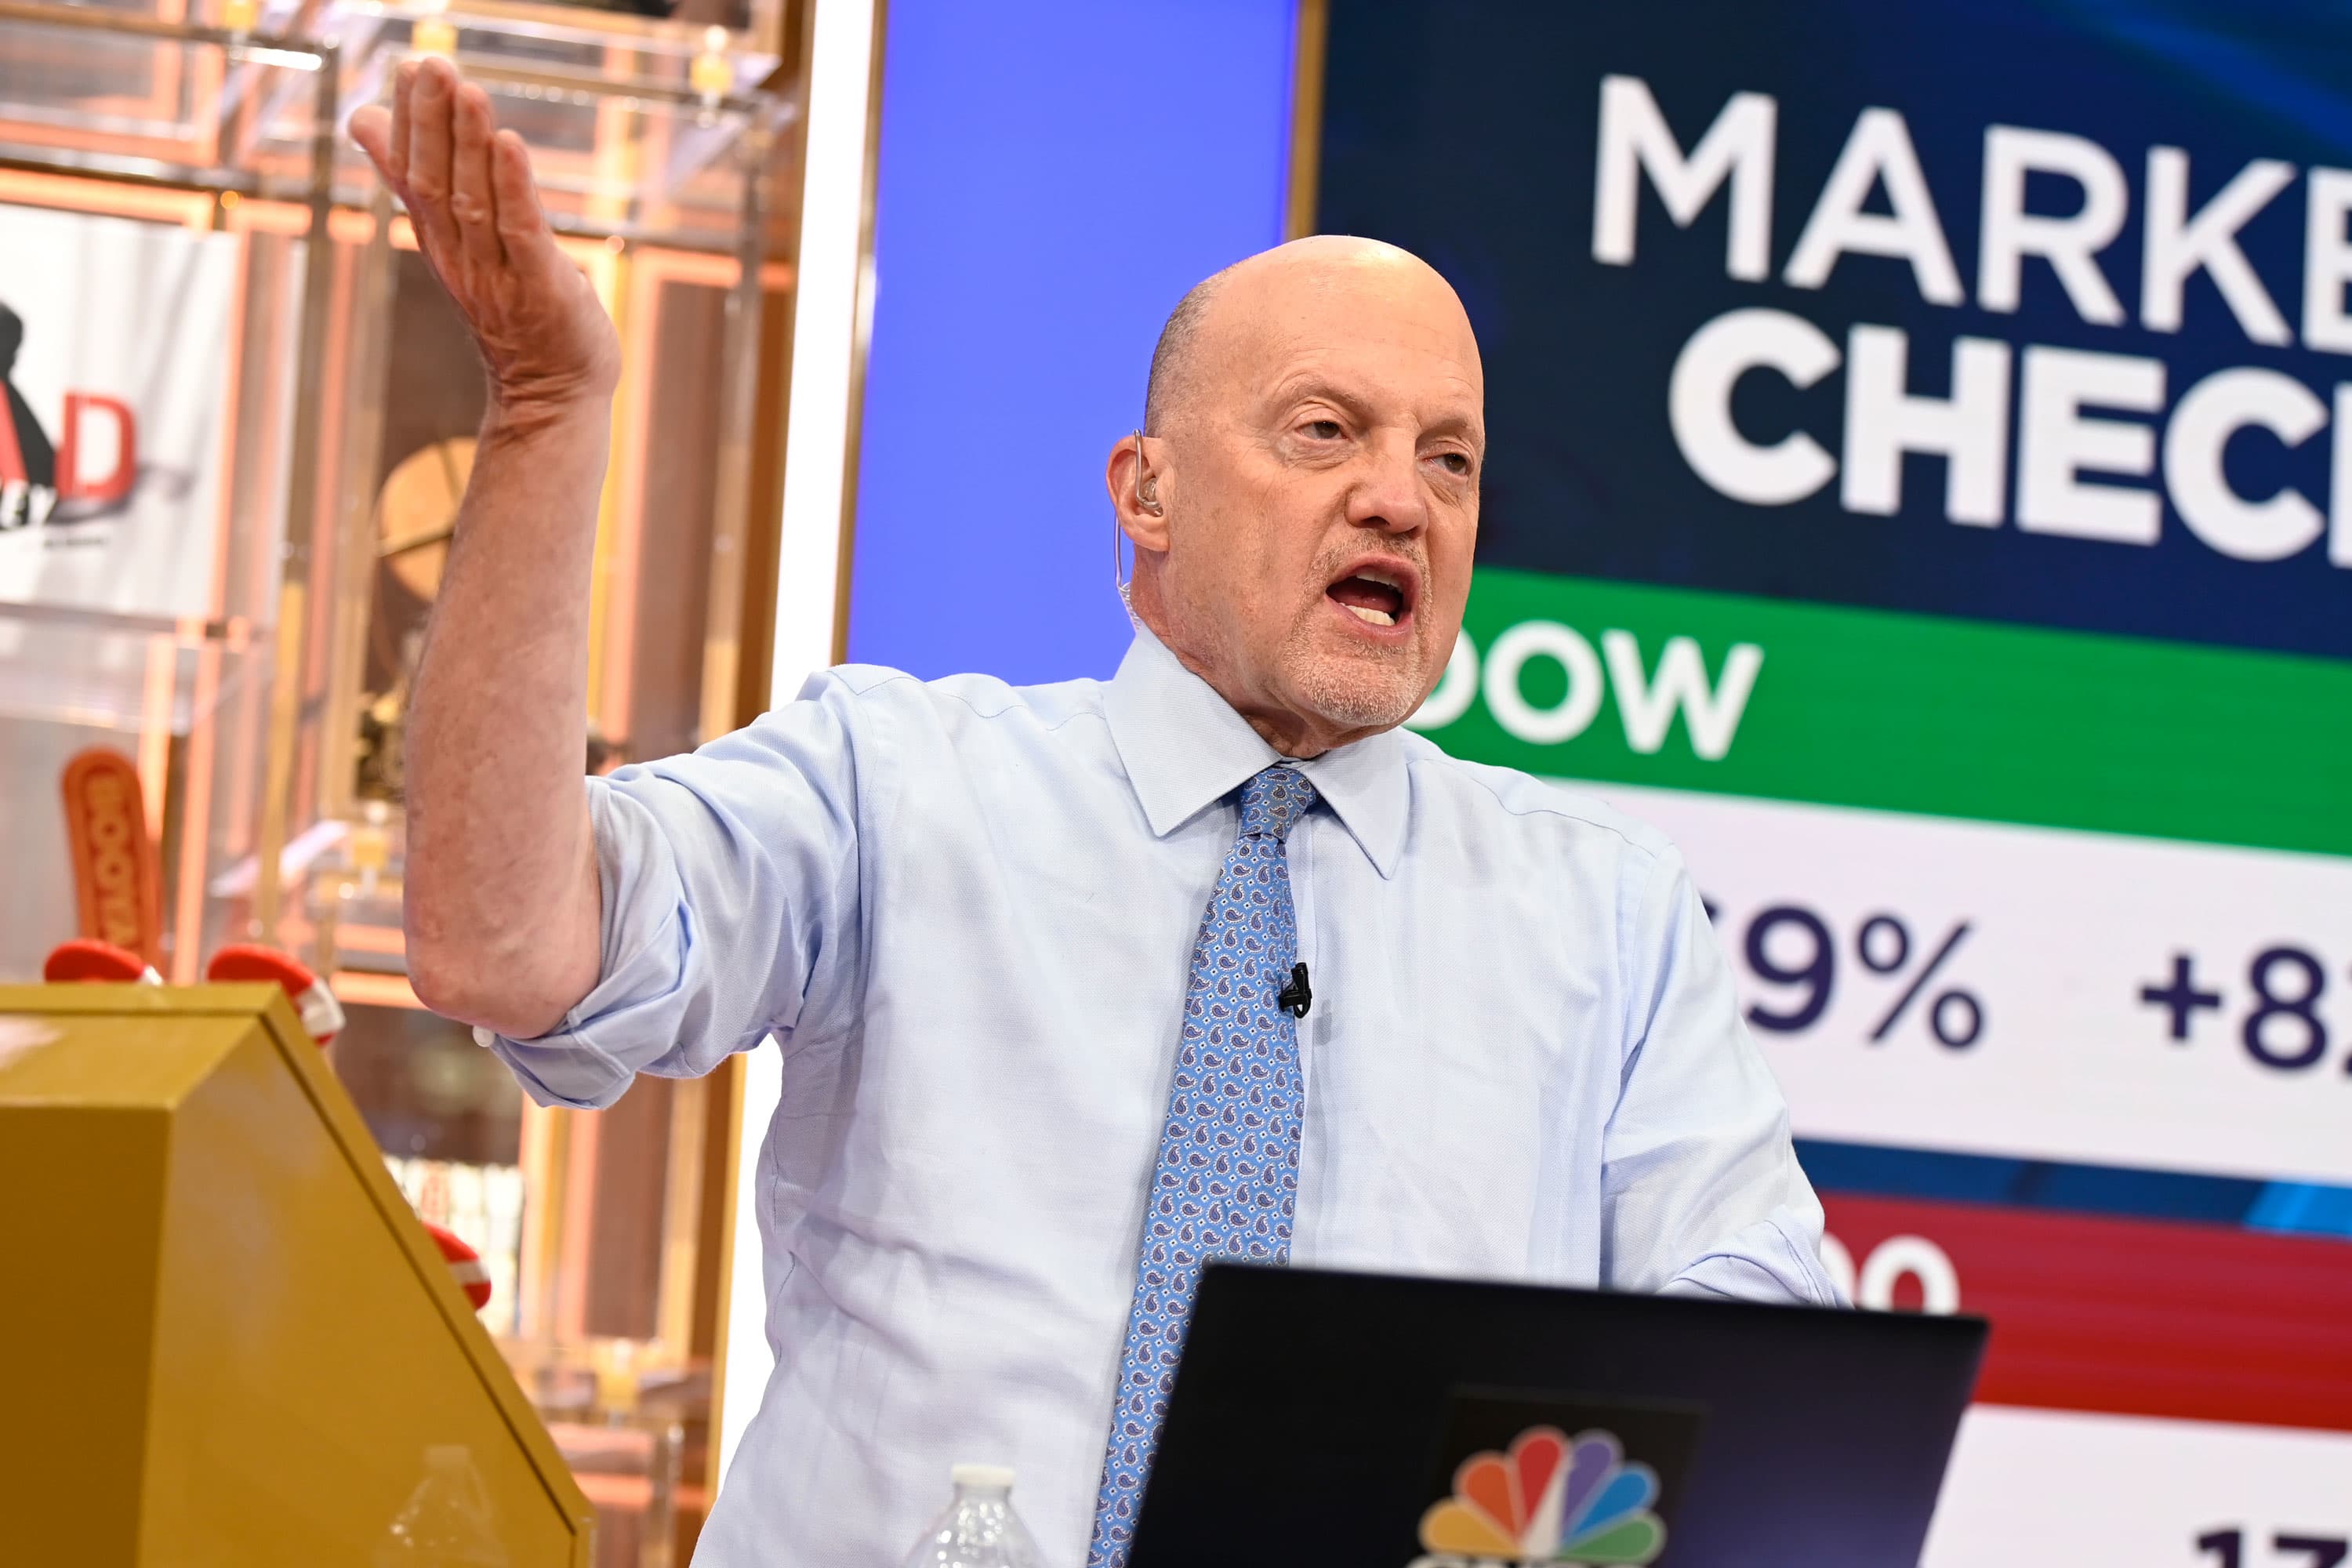 Cramer predicts that recent earnings disappointments and PMI data may lead to interest rate reductions